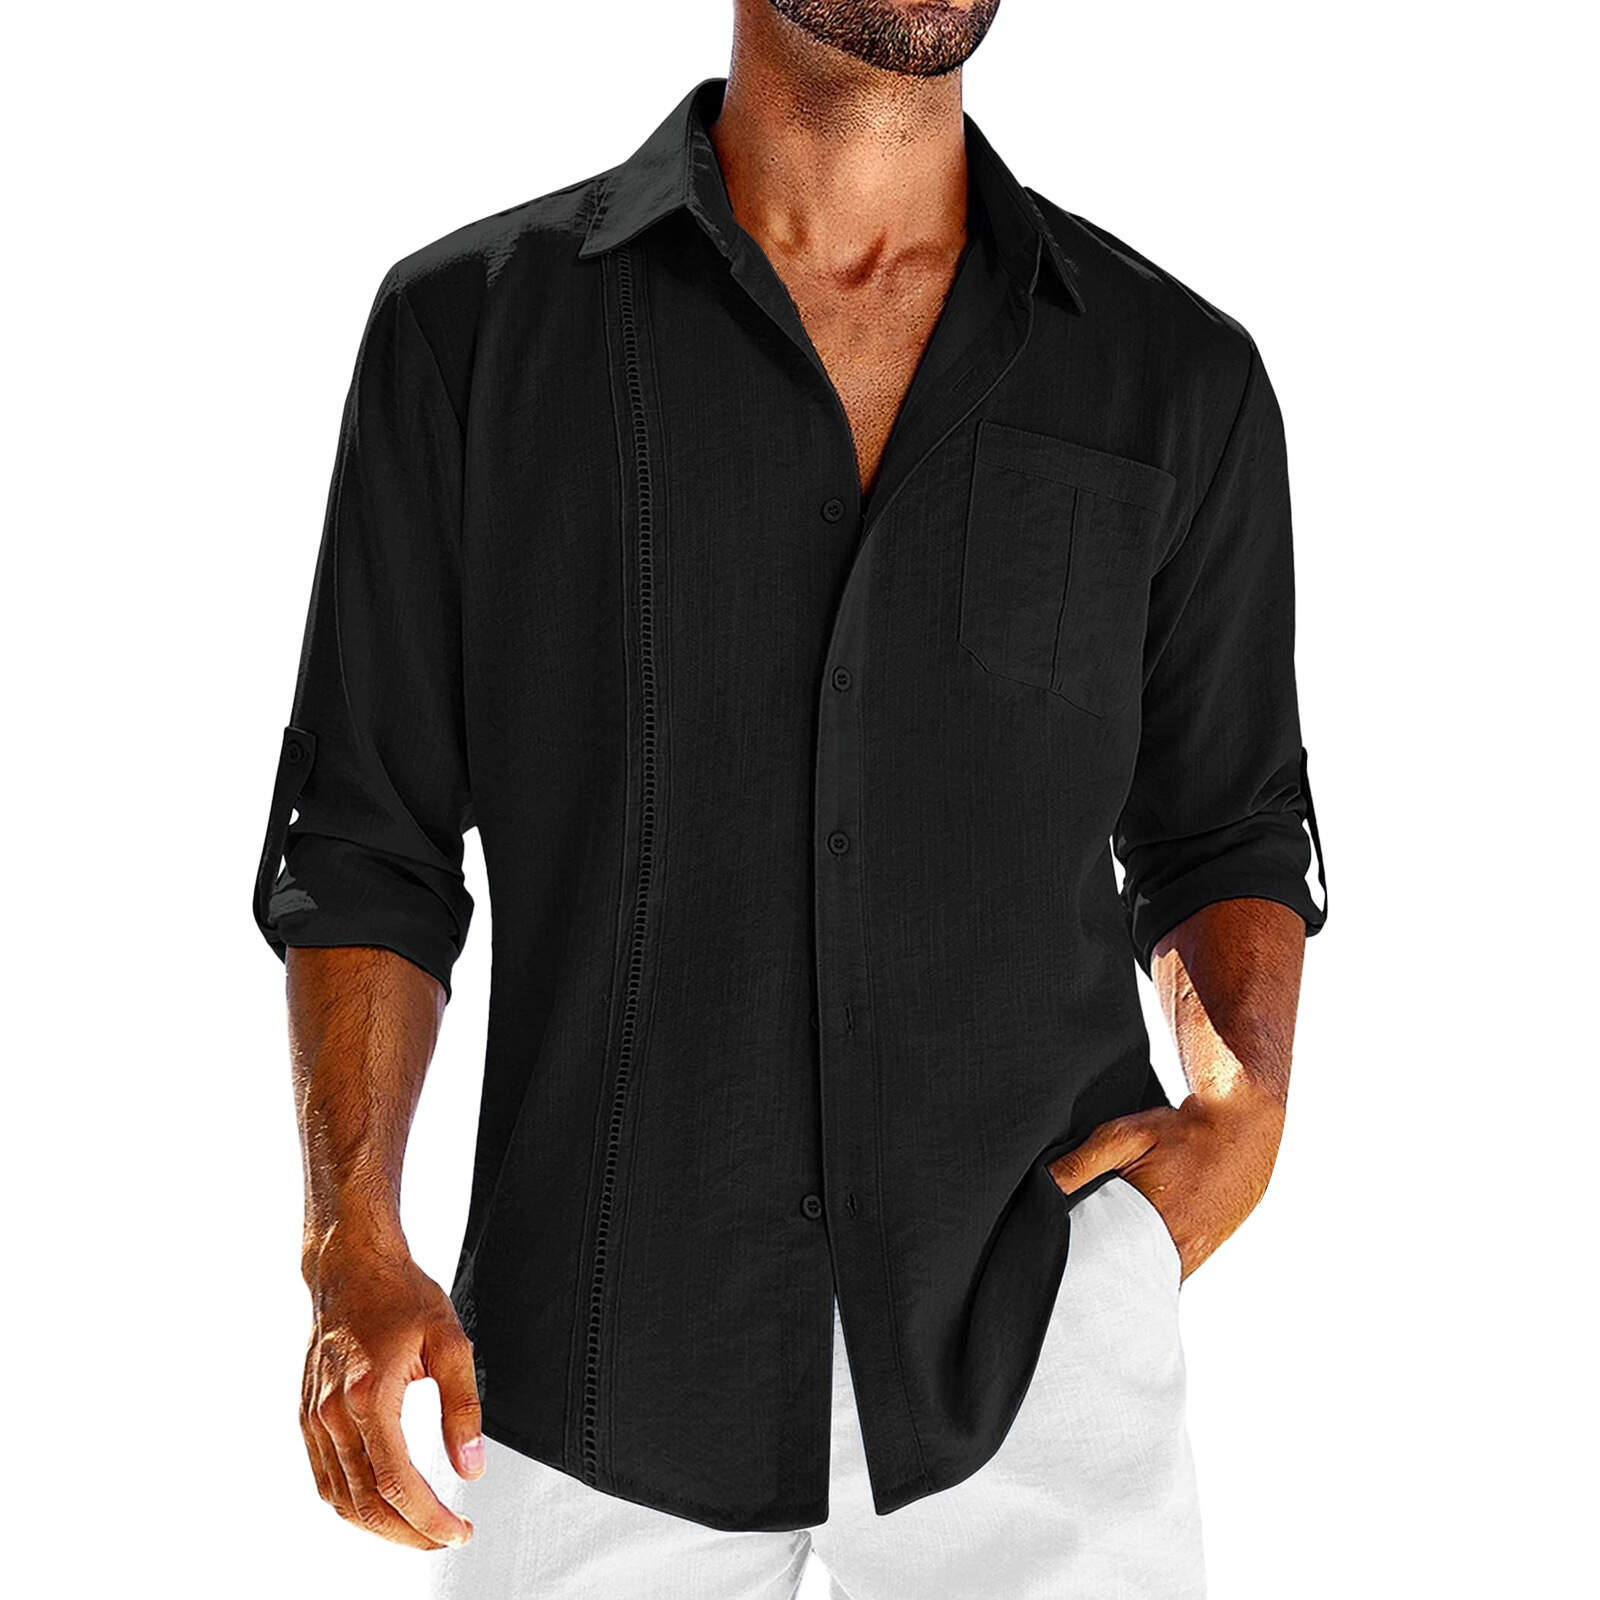 The latest men's long-sleeved V-neck knitted shirt, warm, comfortable and easy to clean - Buy 3 and get free shipping